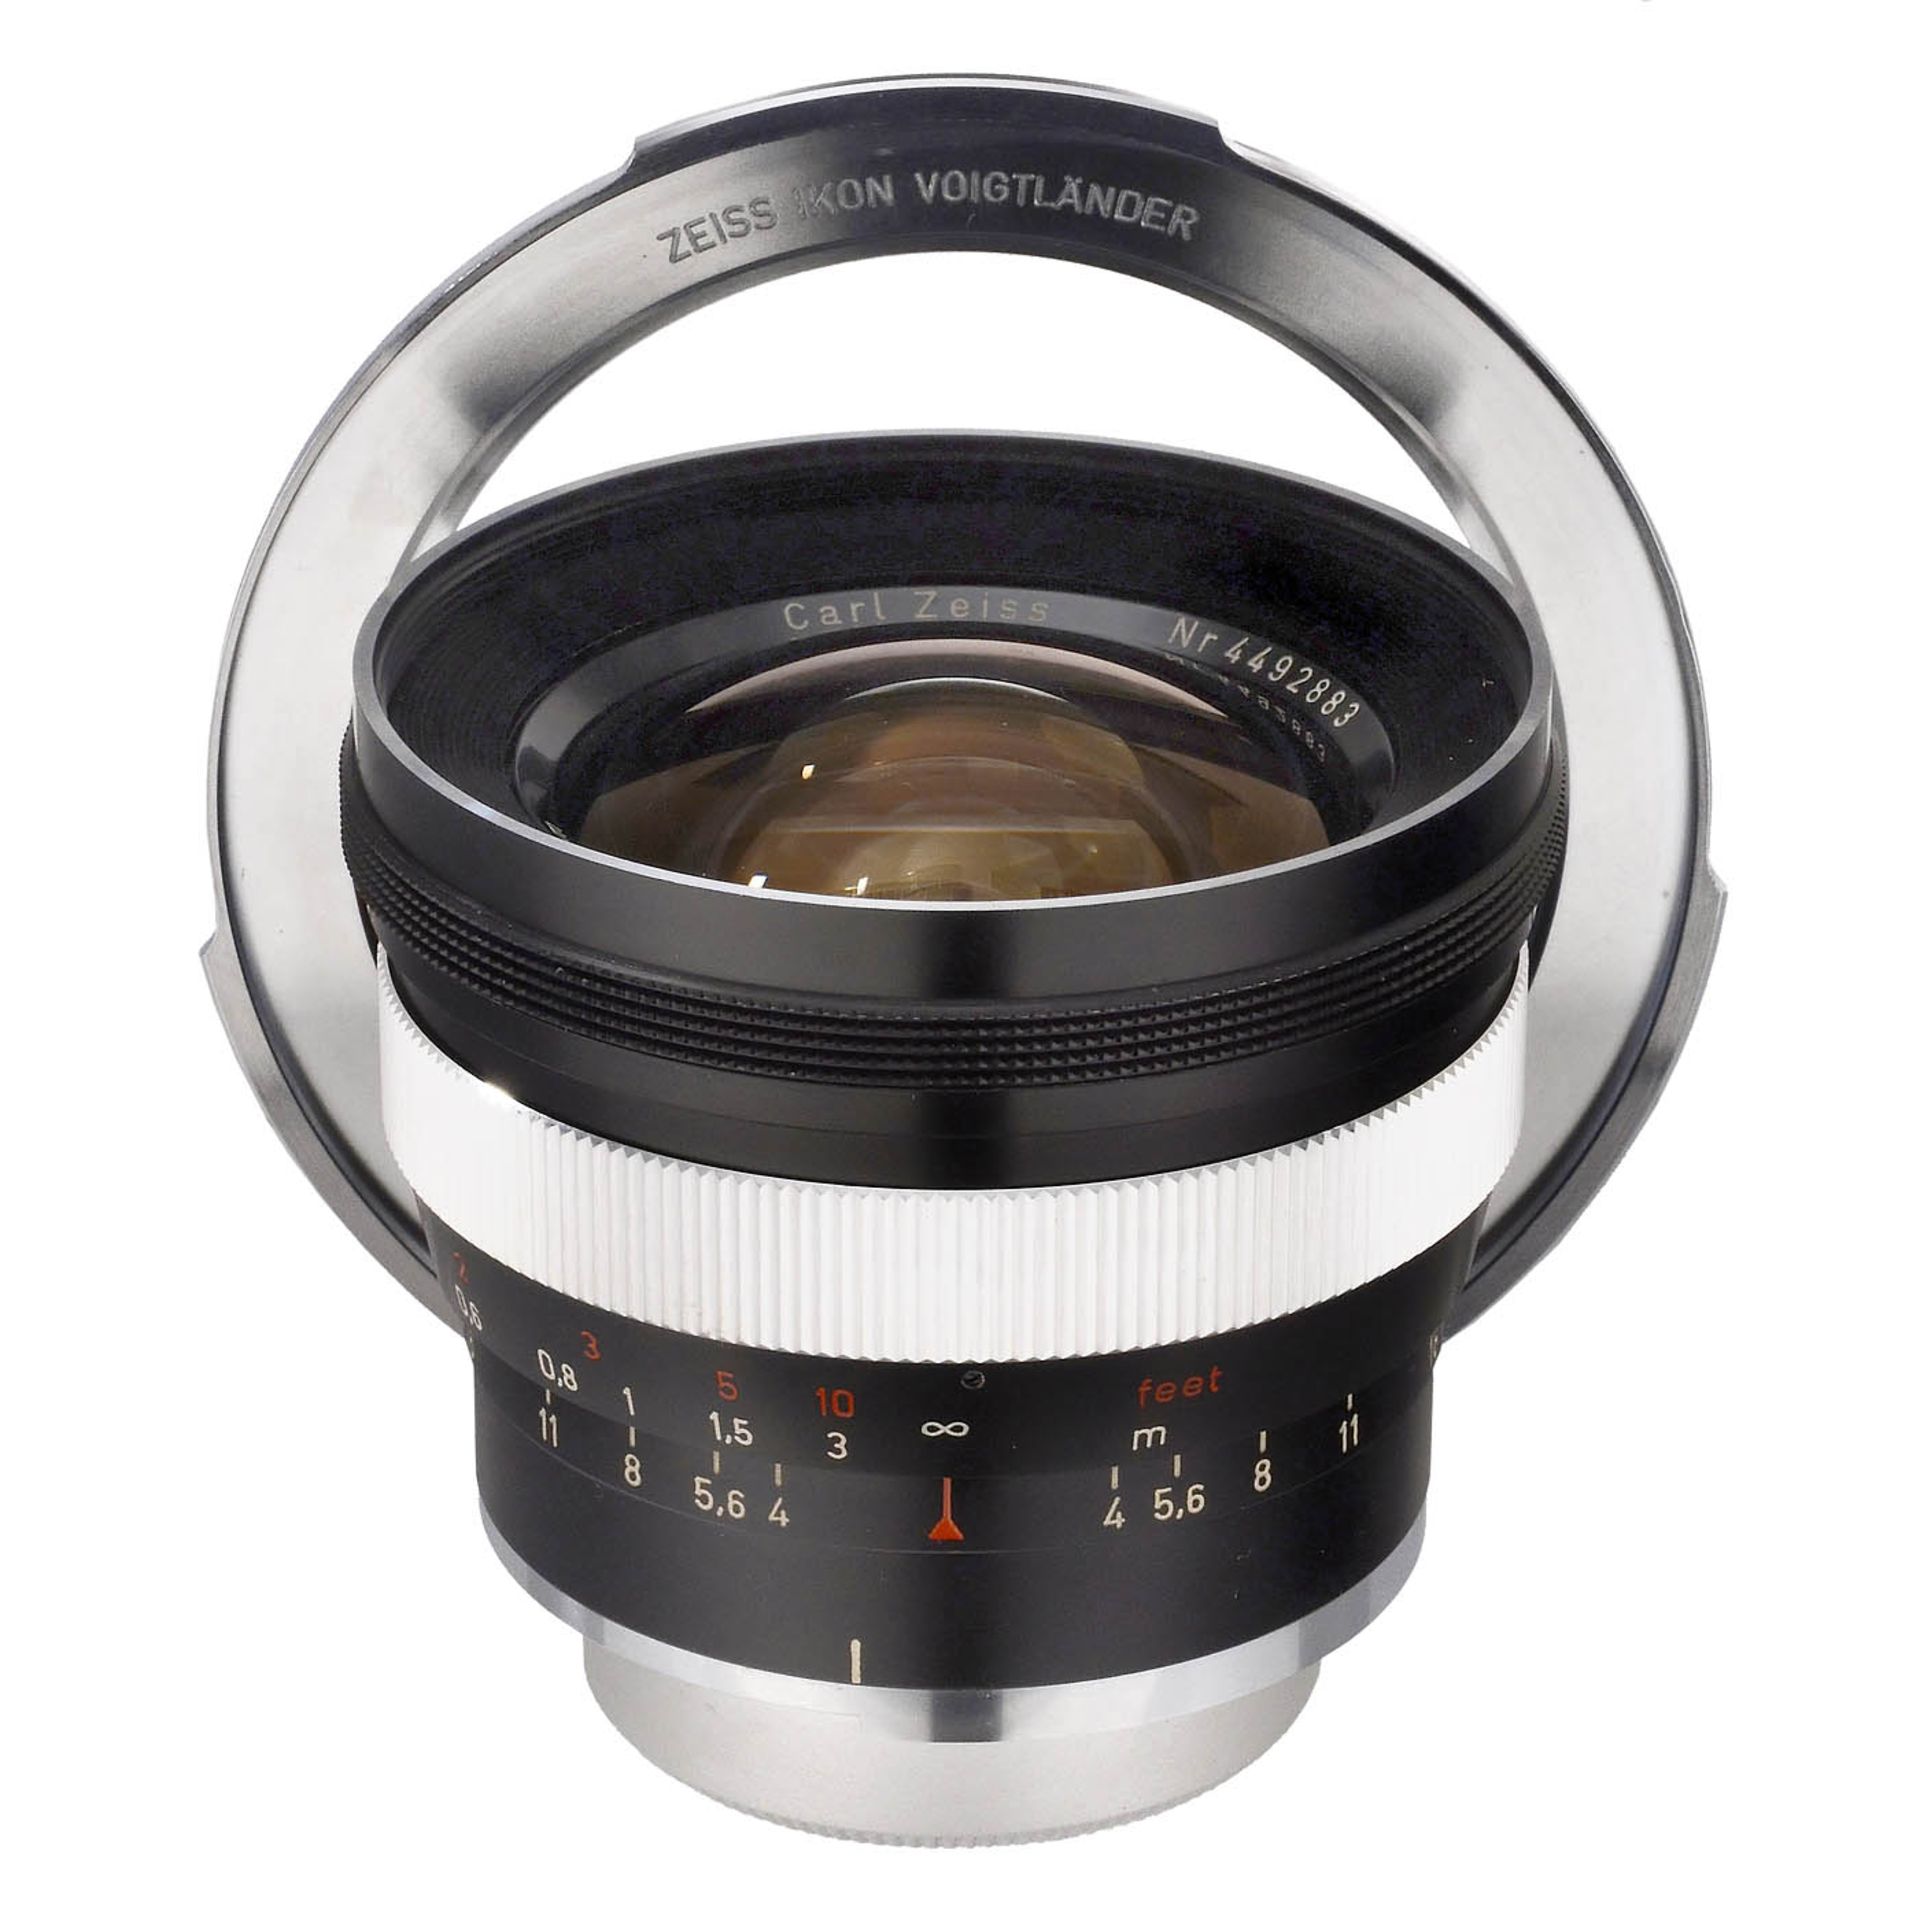 Distagon 4/18 mm Lens for the Contarex